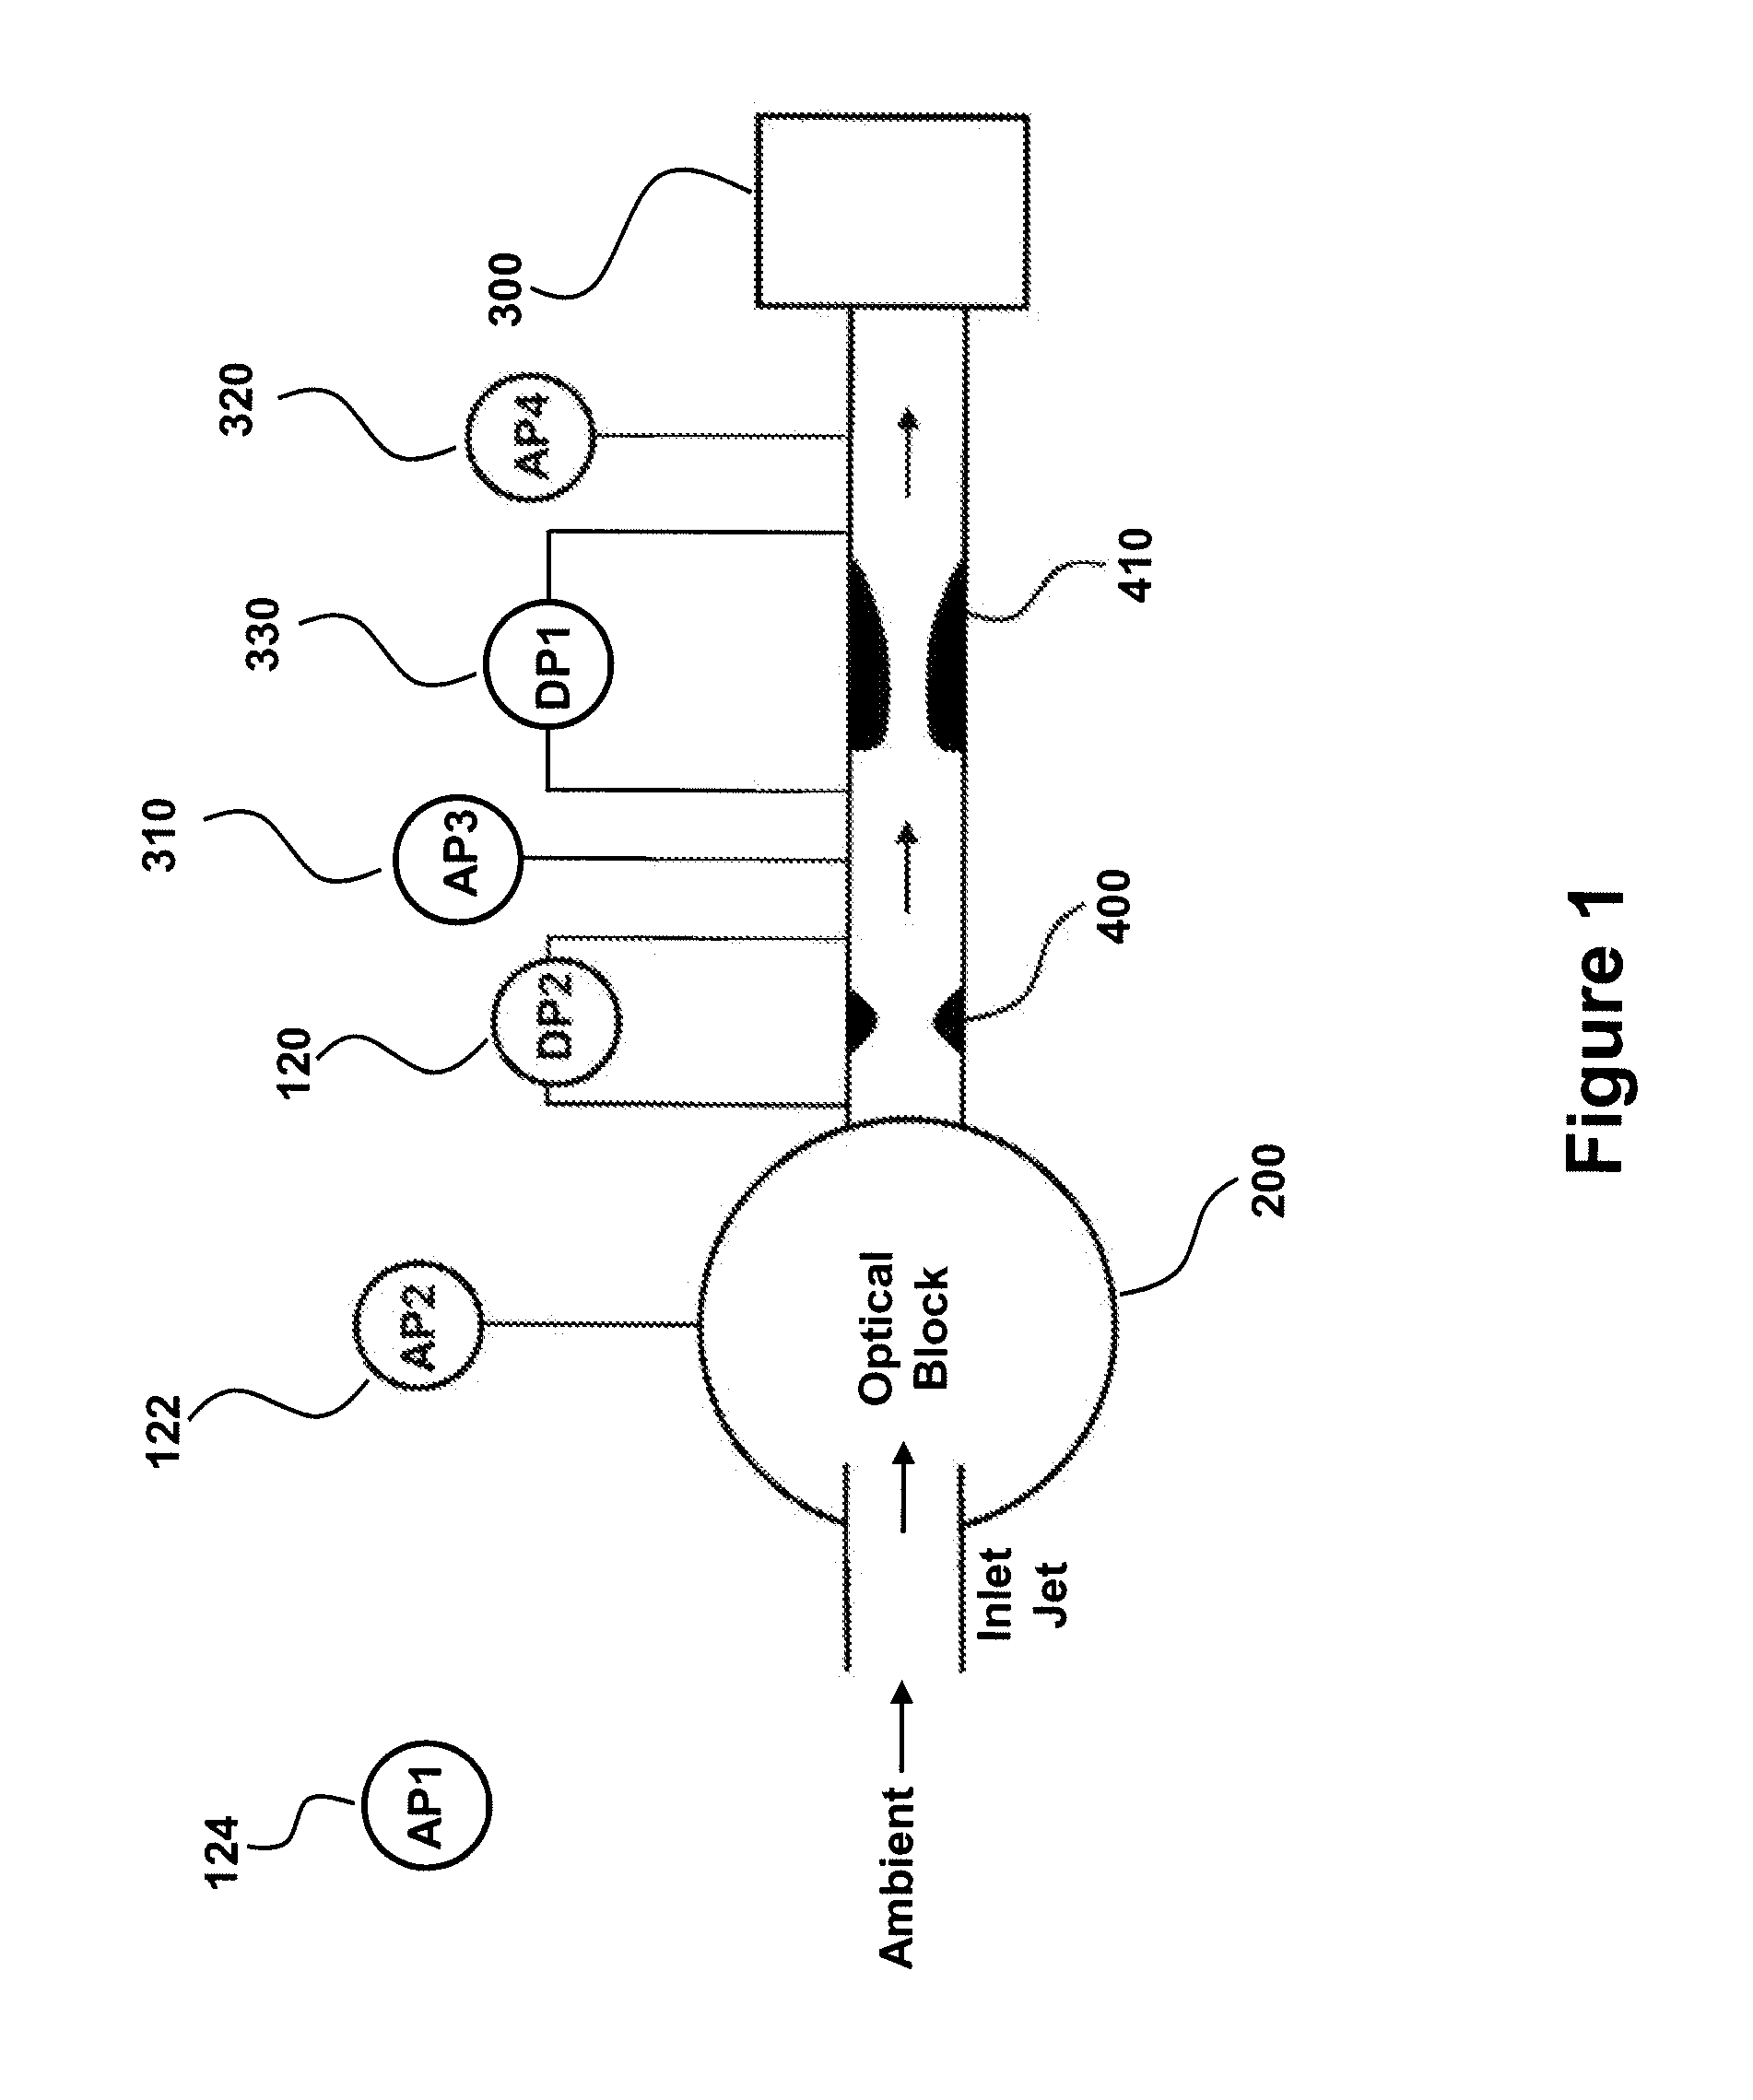 Flow monitored particle sensor